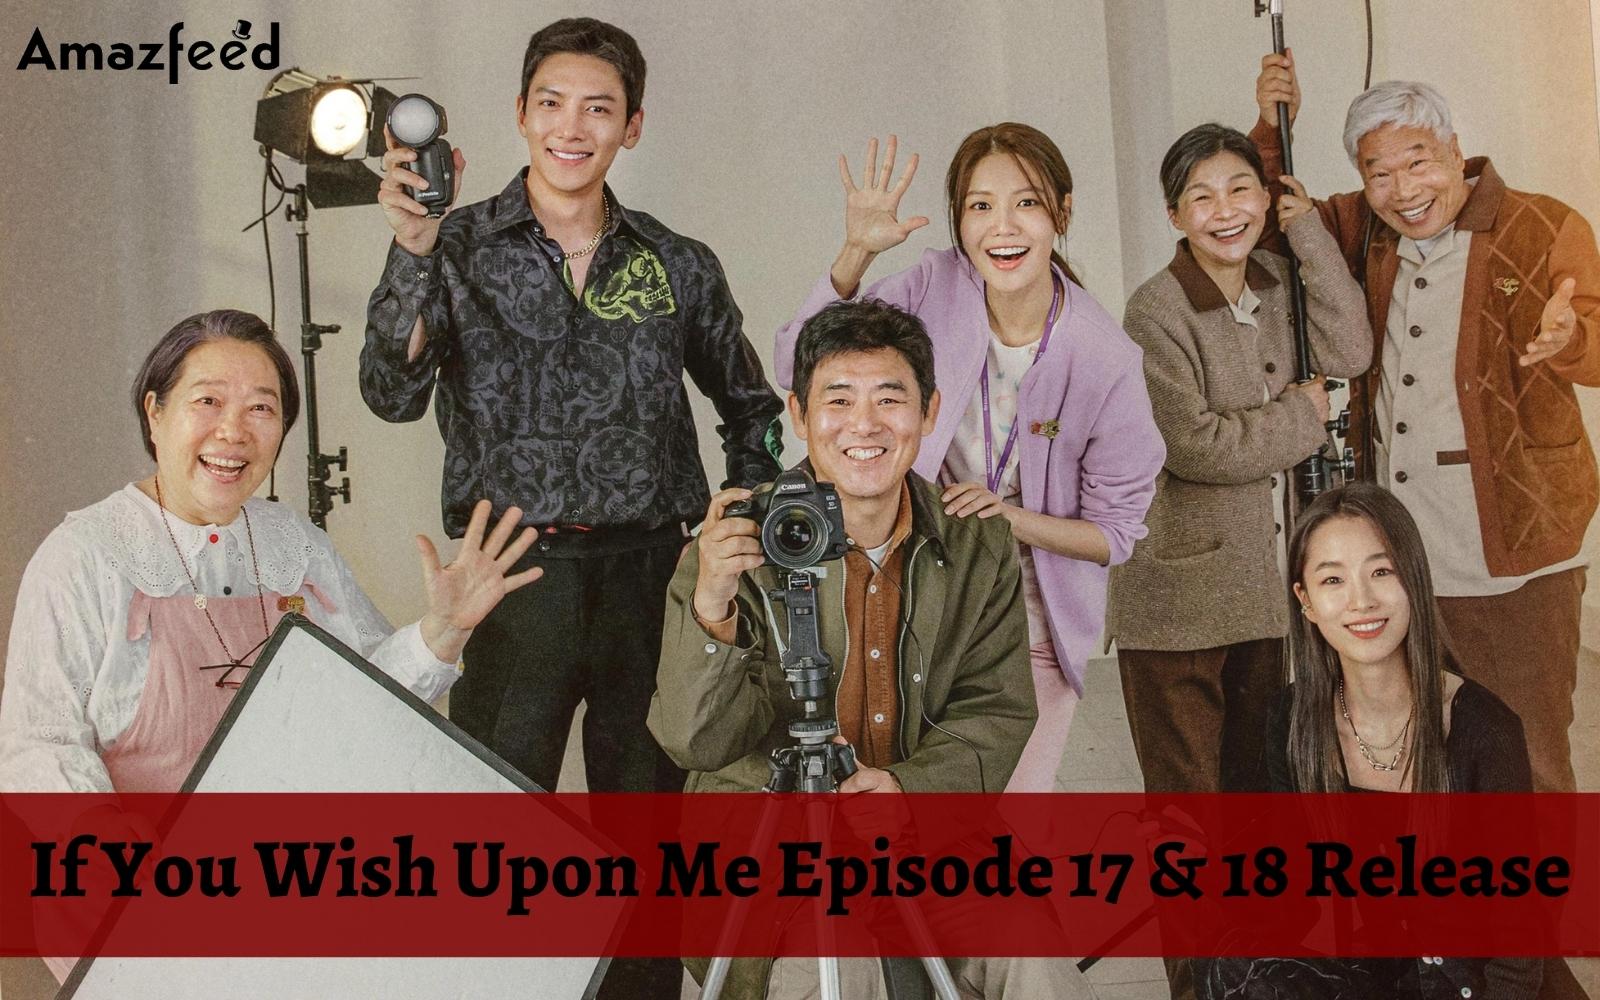 Is If You Wish Upon Me Episode 17 & 18 Coming or Not? Is If You Wish Upon Me Season 1 Ended? Know about If You Wish Upon Me Season 1